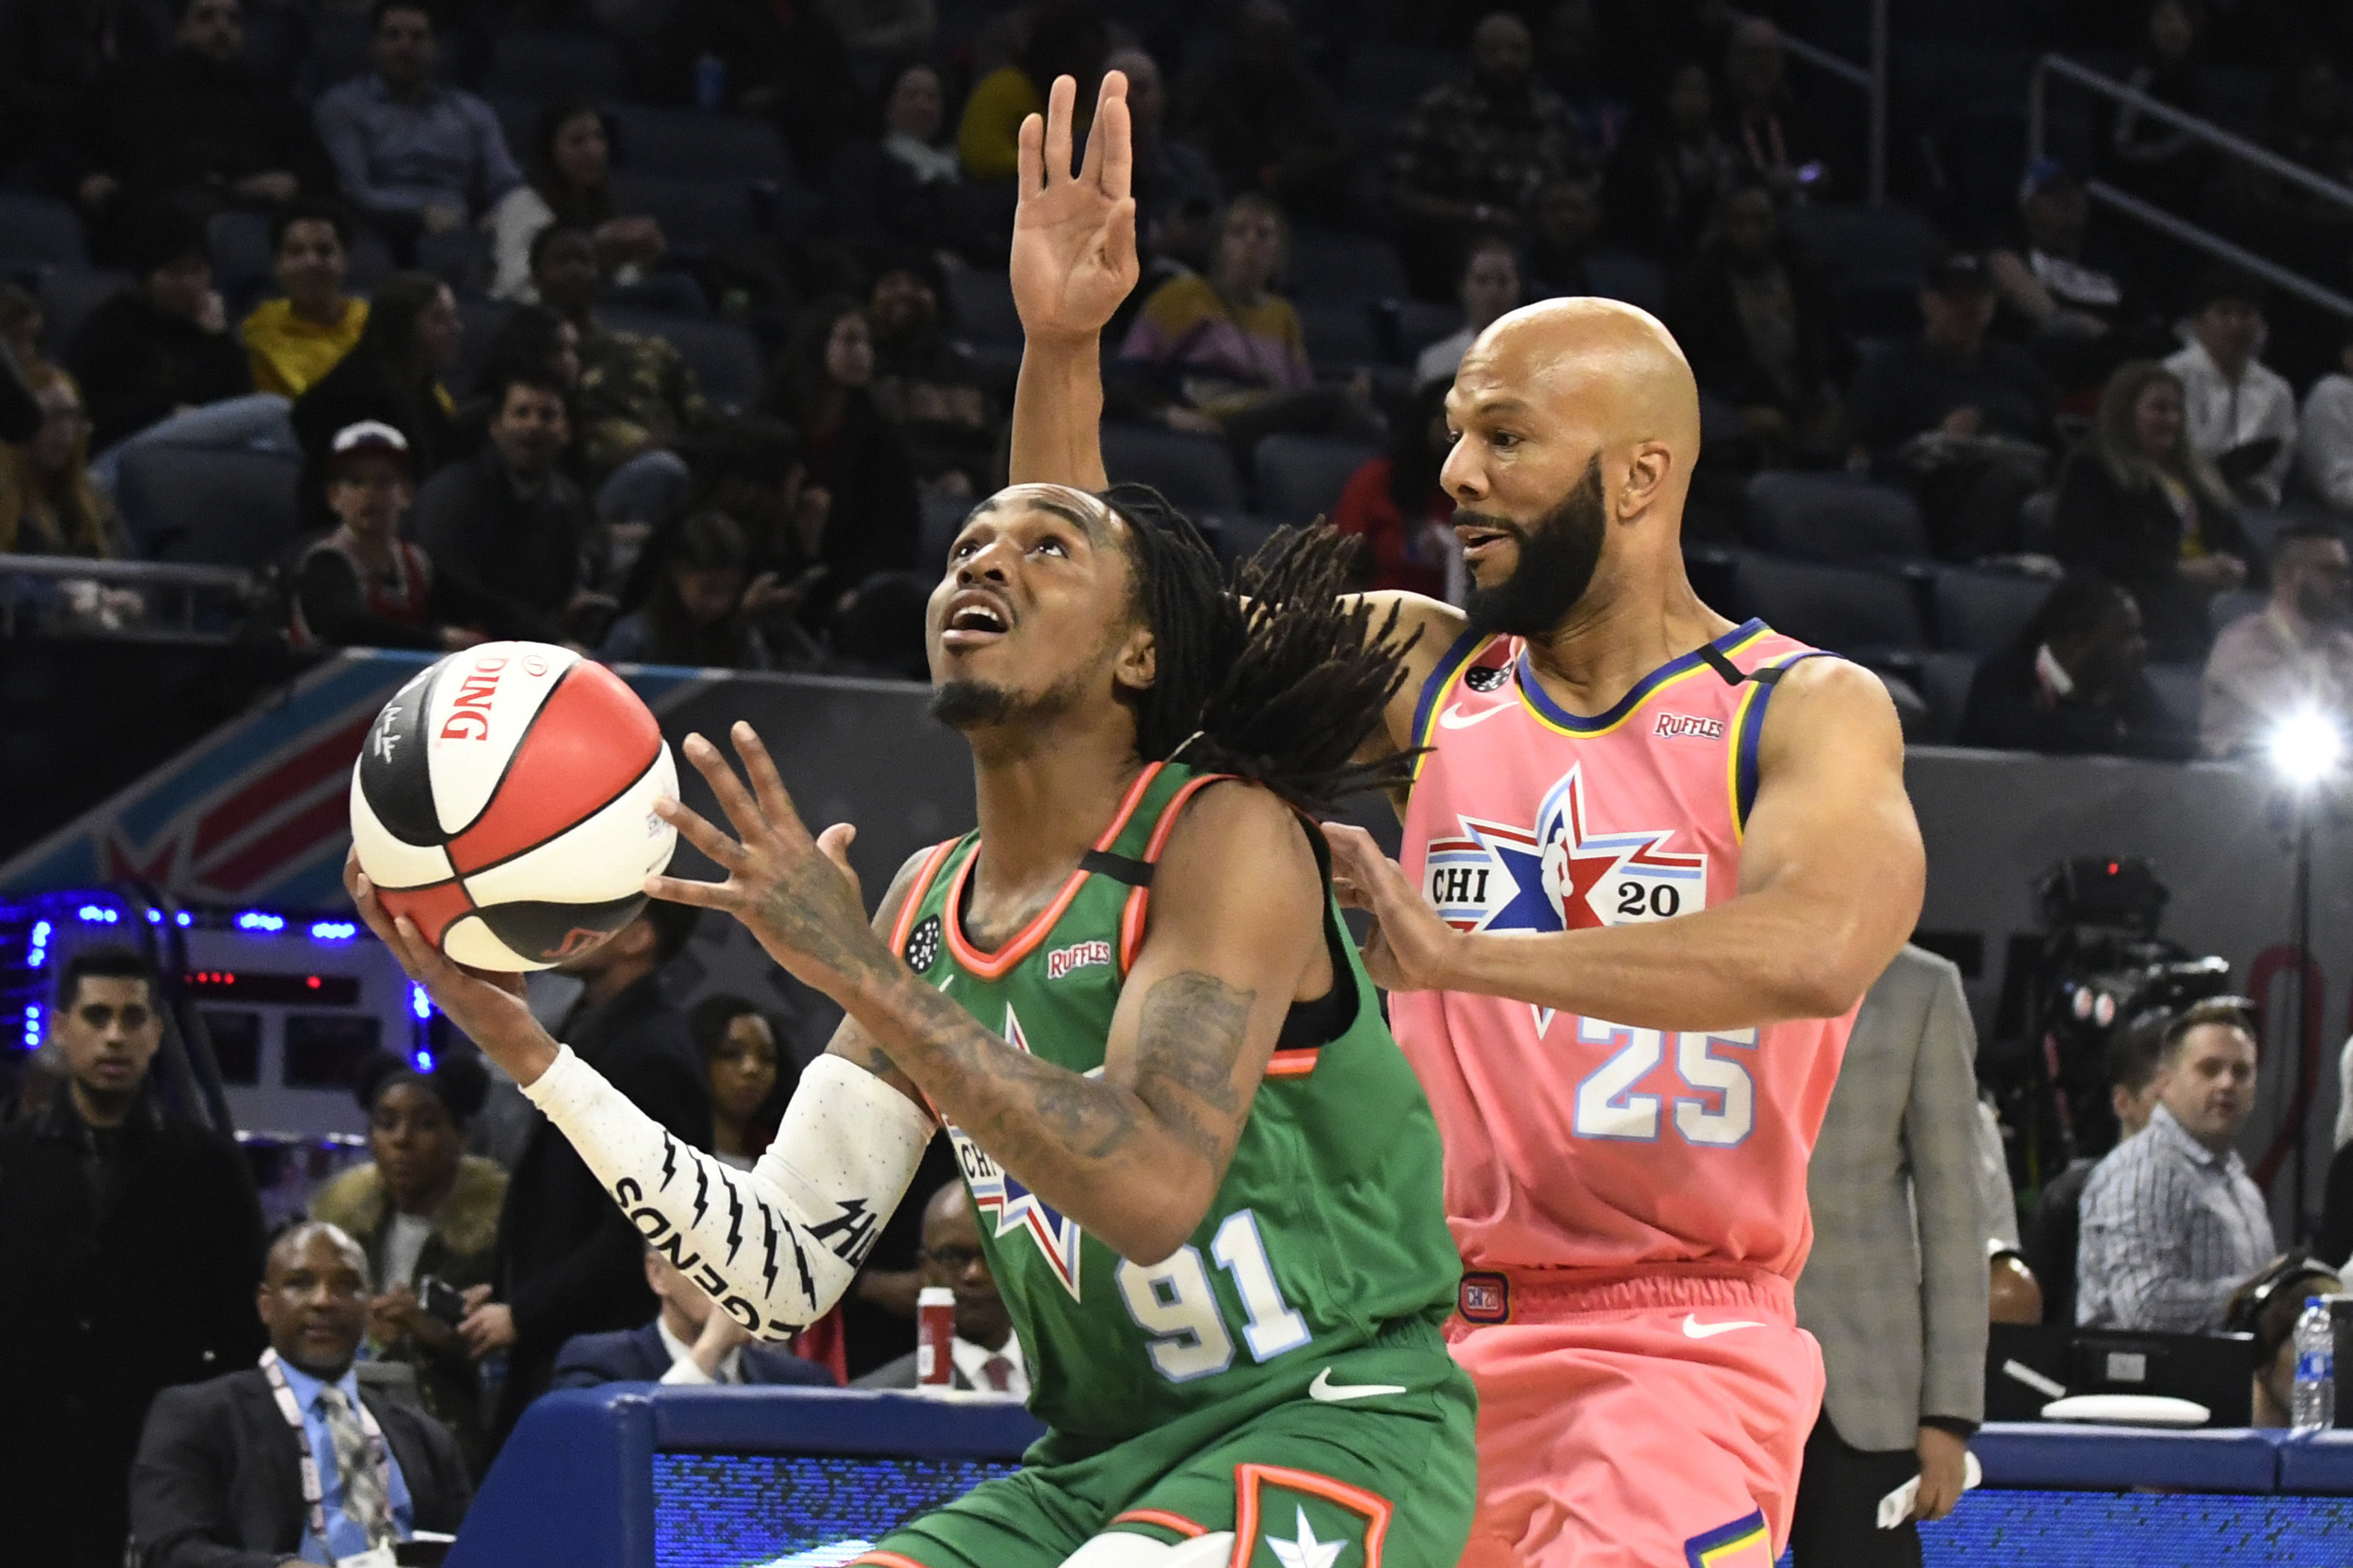 NBA: How to watch the NBA All-Star Celebrity Game Friday (2-17-23)